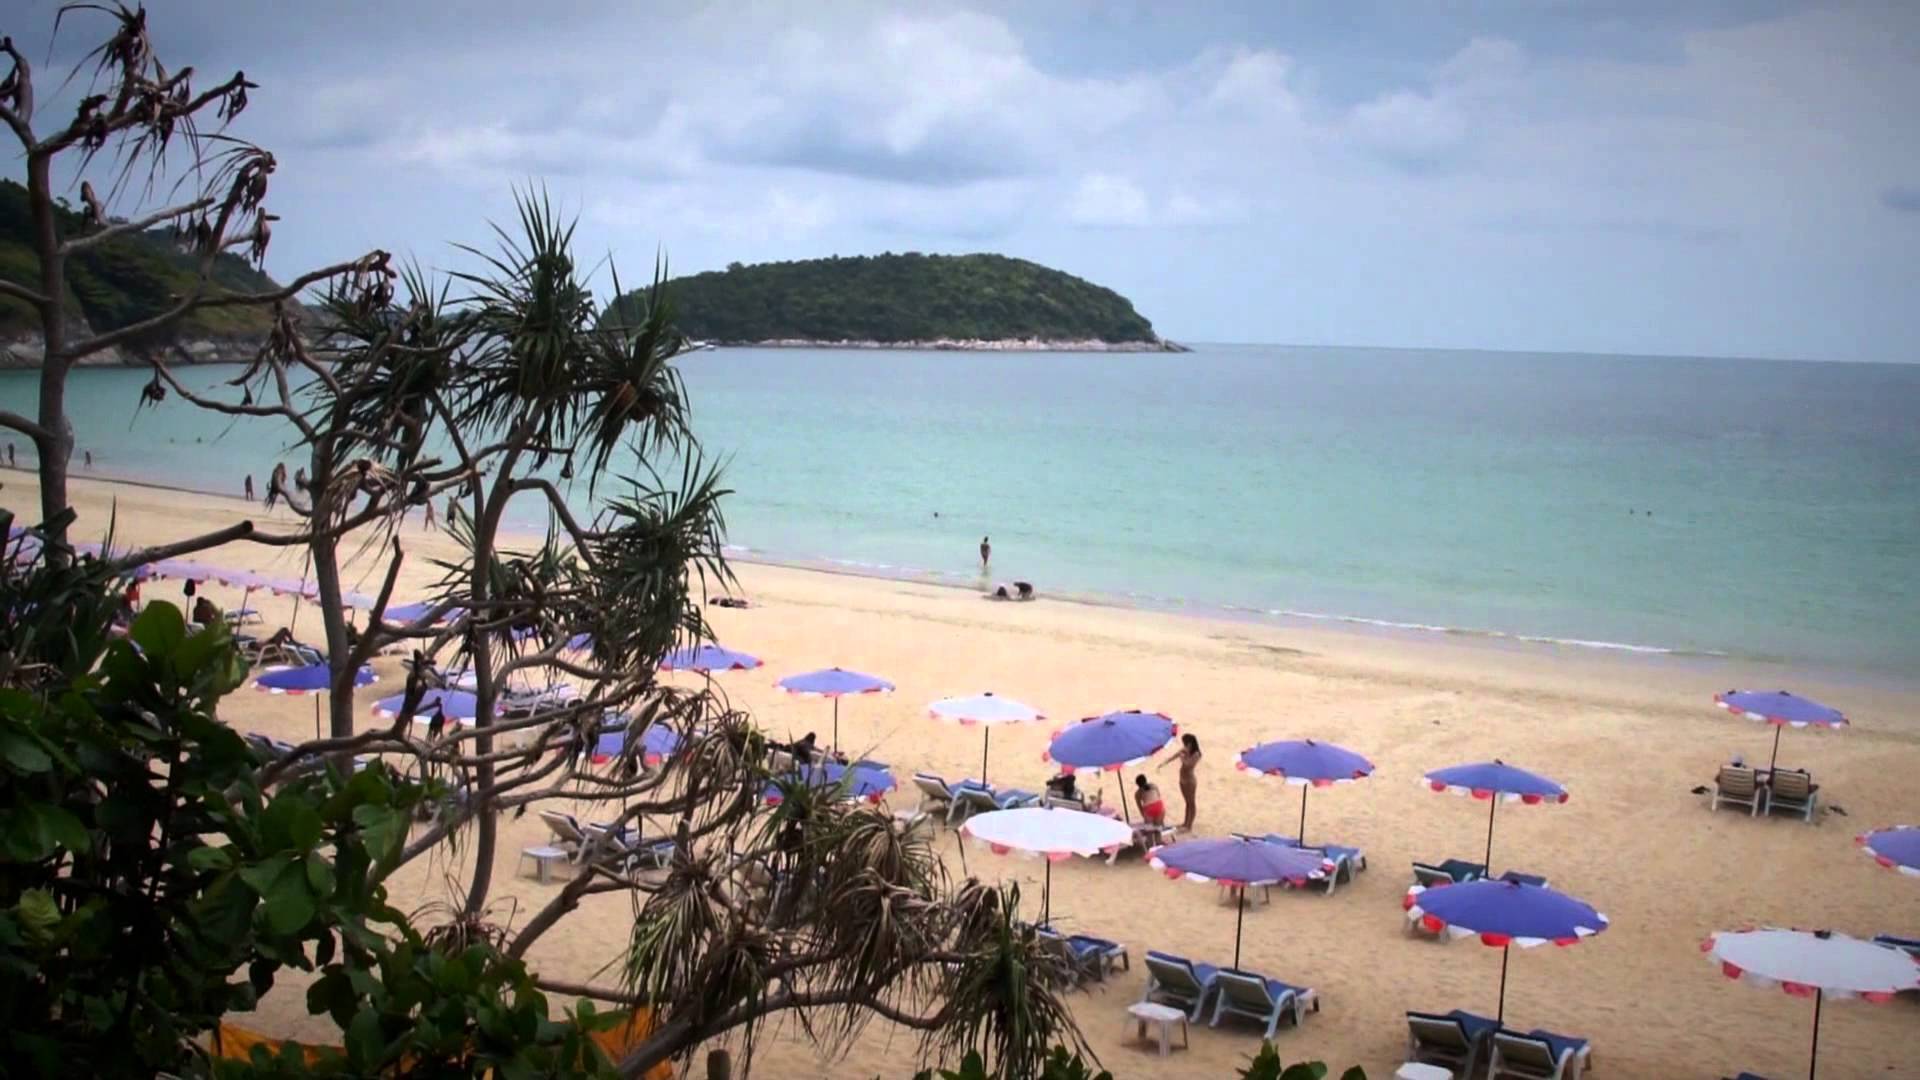 Spring vacation on the beach in the resort of Hua Hin Thailand